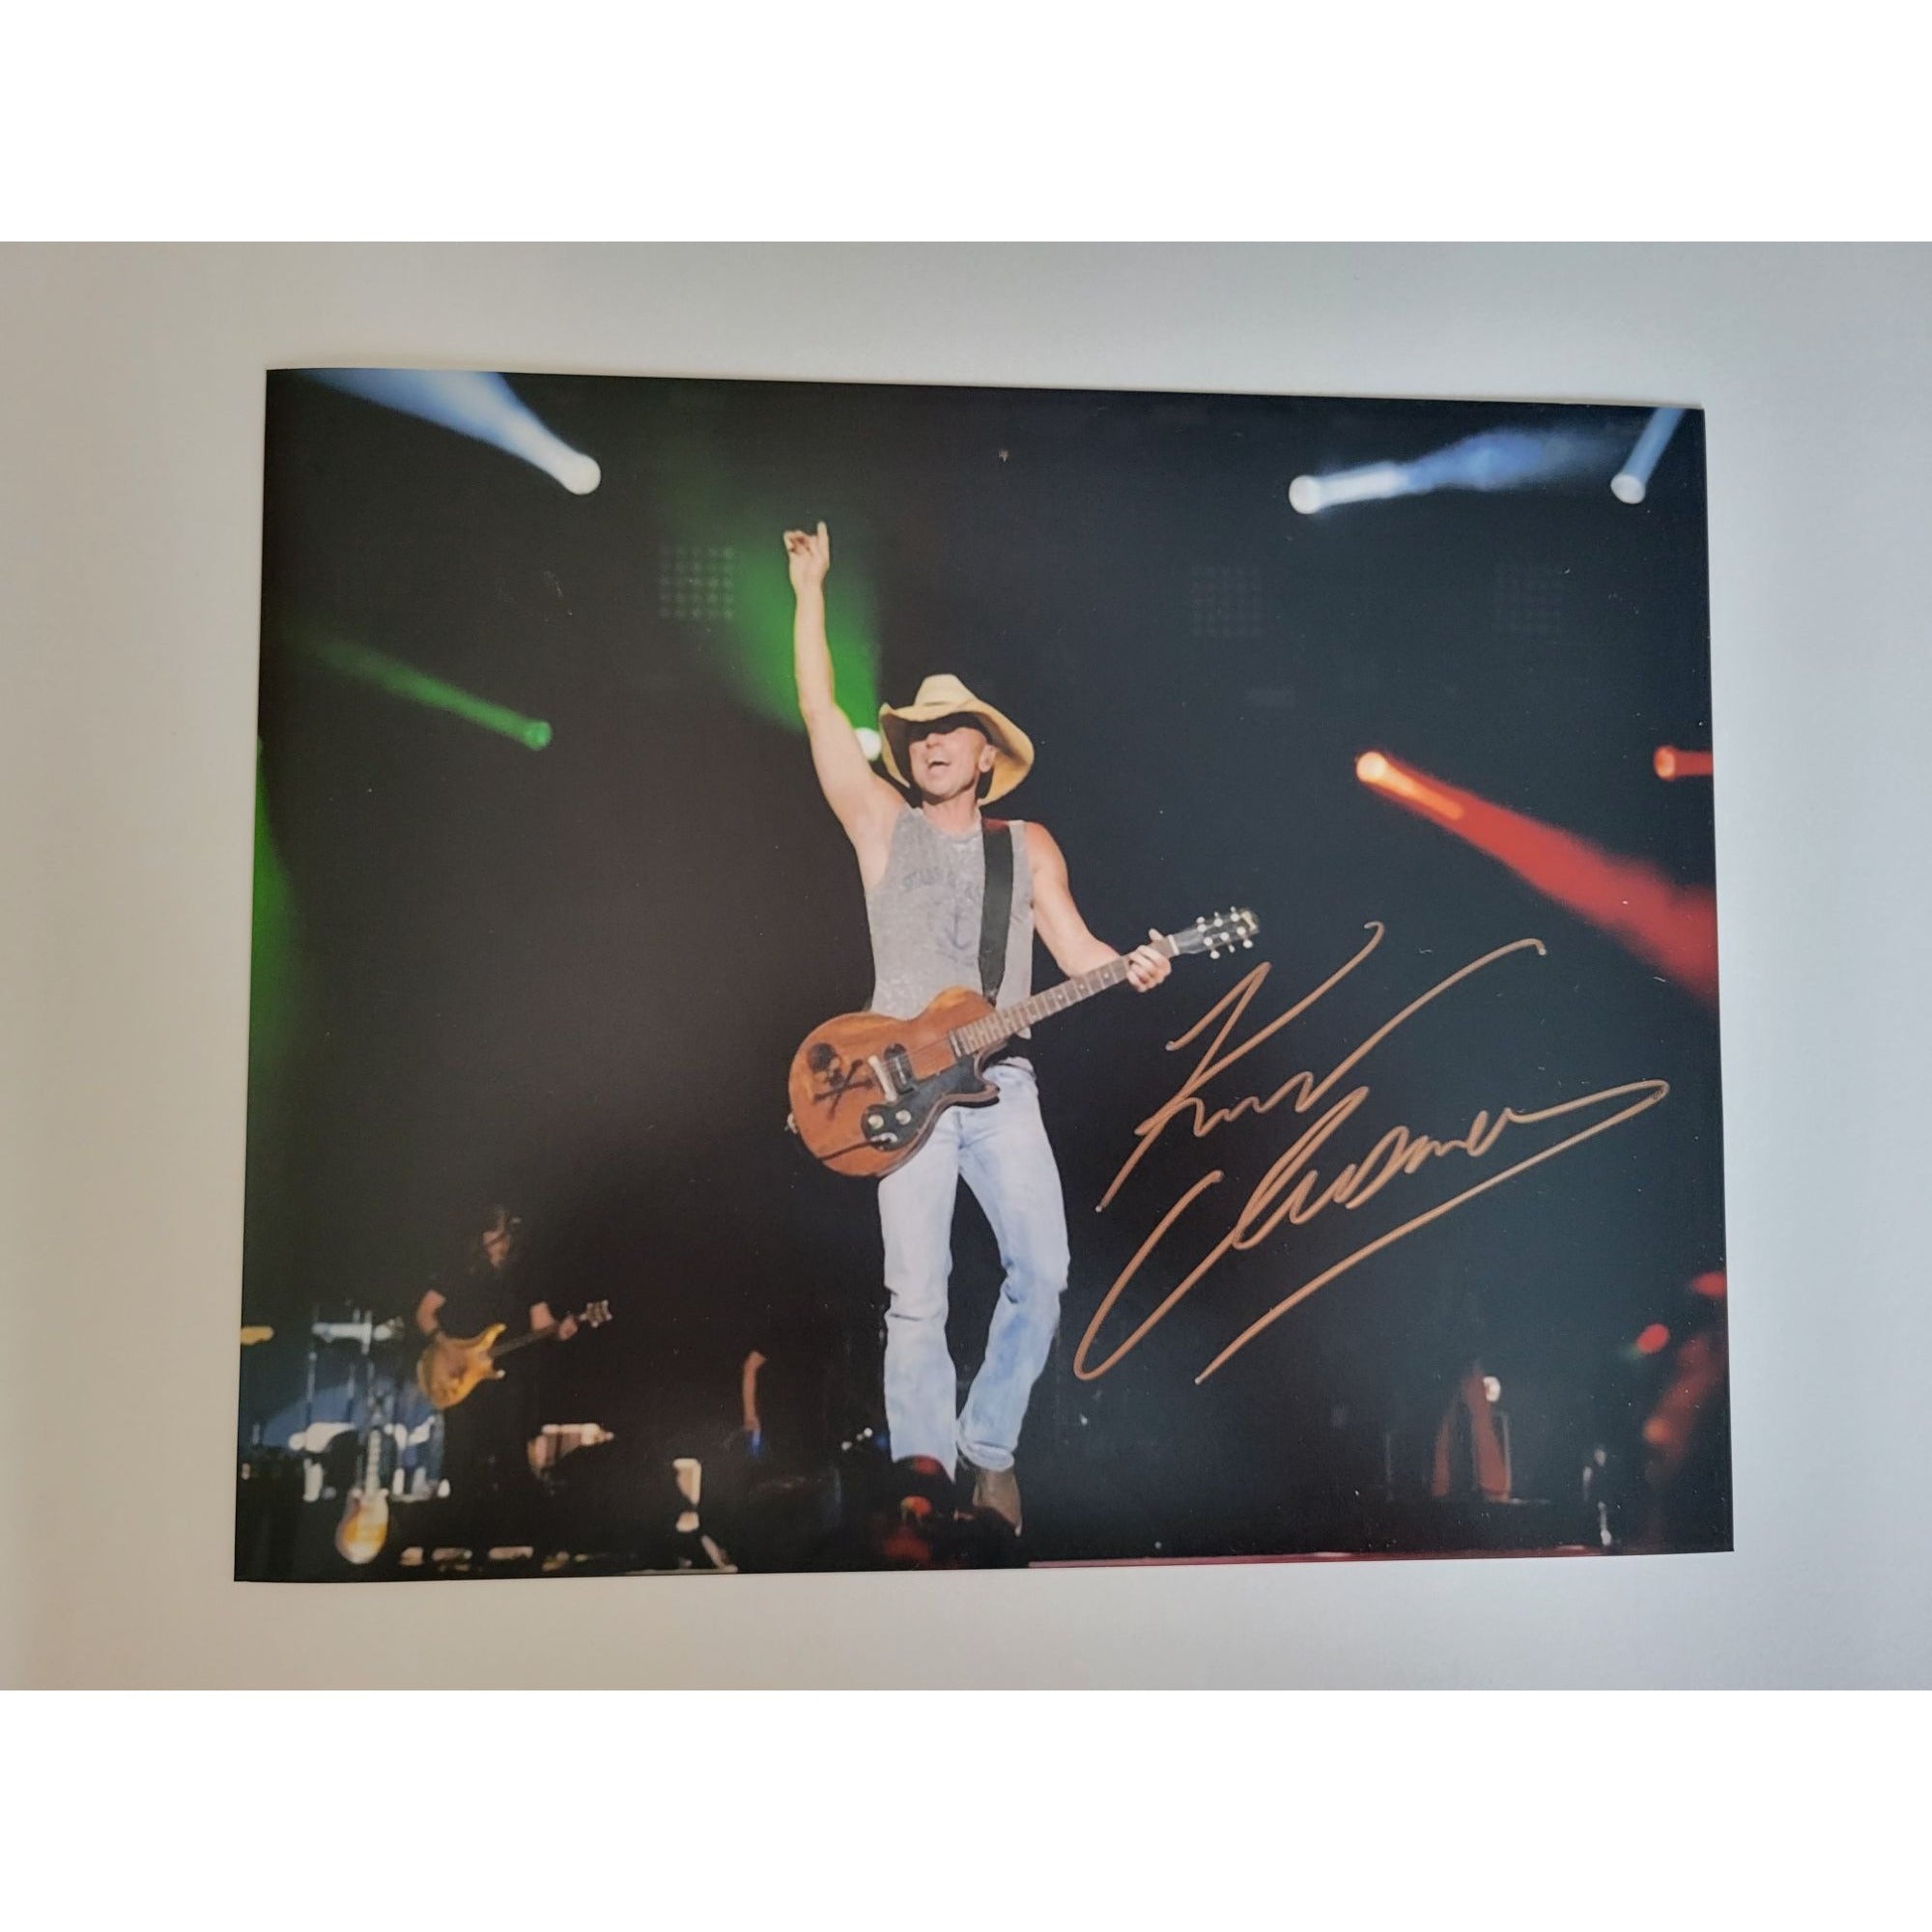 Kenny Chesney 8x10 photo signed with proof